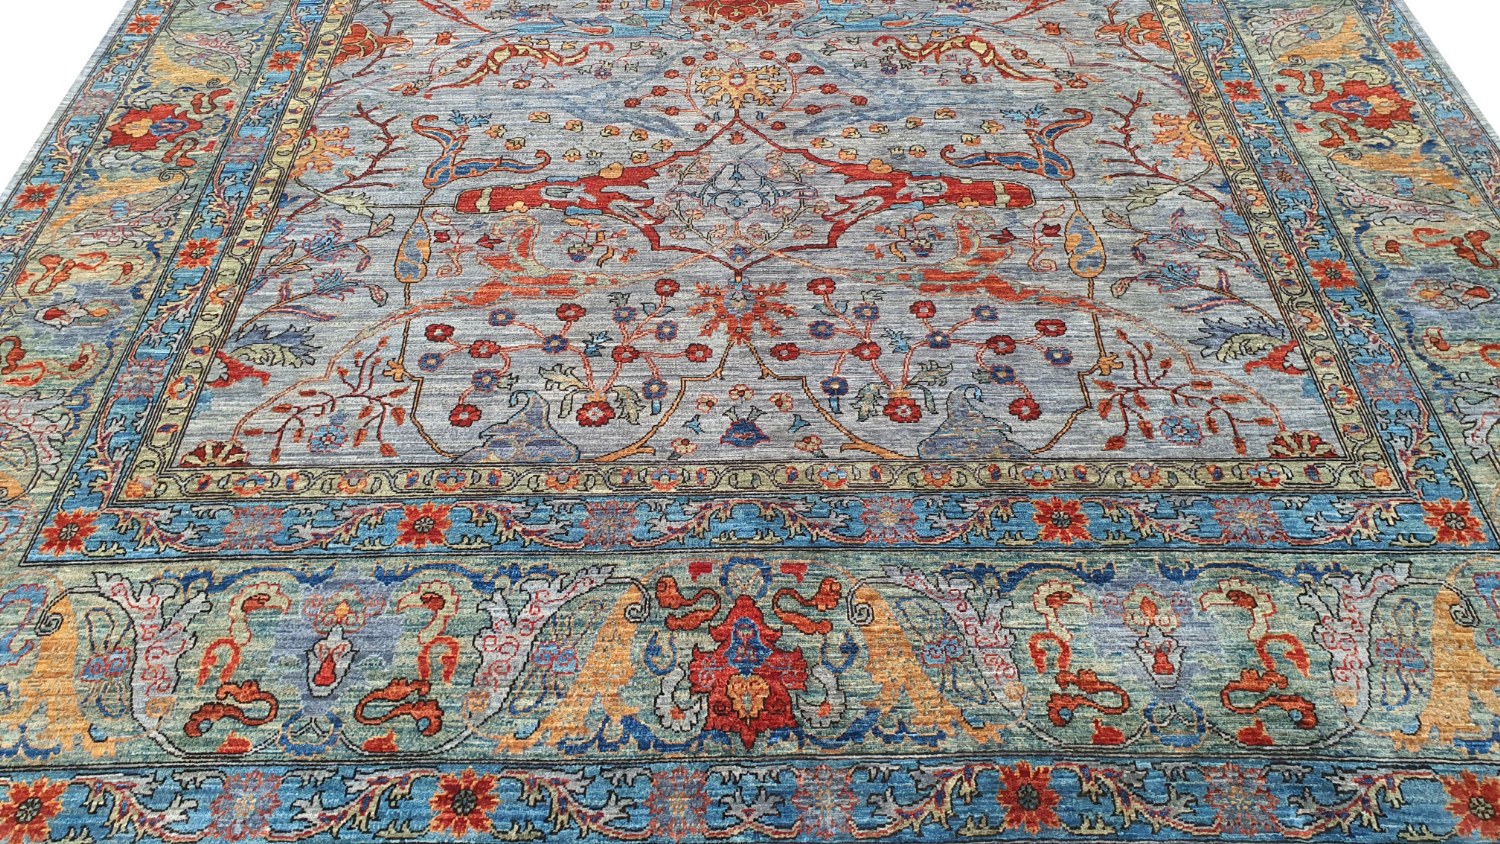 10x14 Aryana & Antique Revivals Hand Knotted Wool Area Rug - MR028164